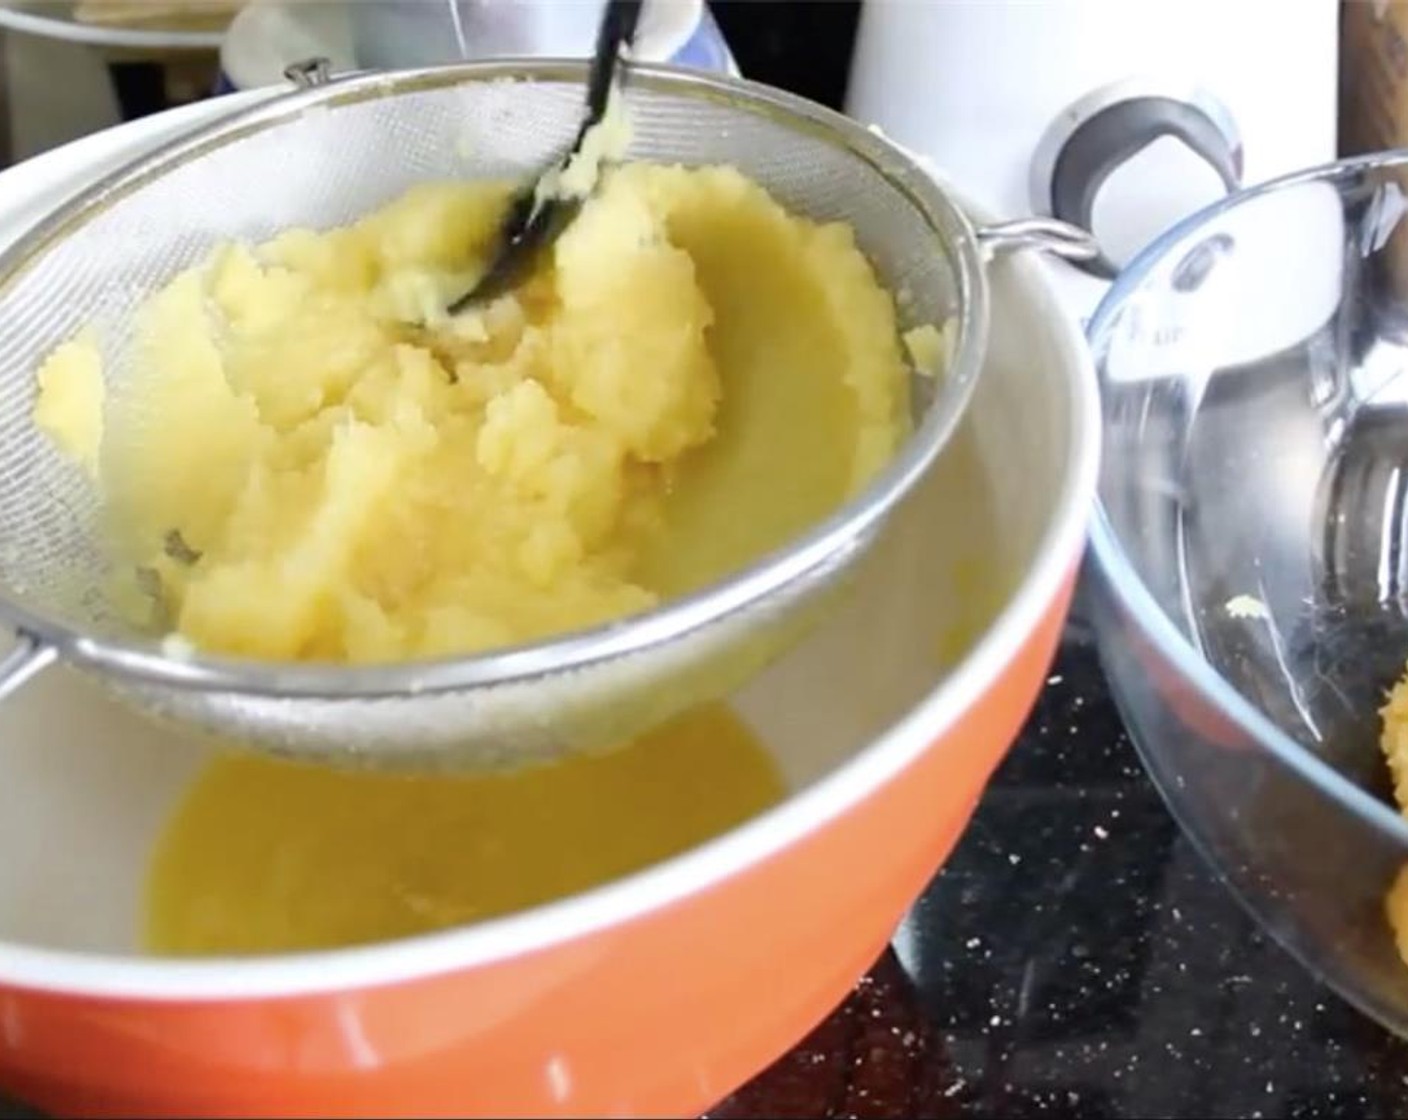 step 2 Drain it using a strainer. You will need to drain about 700 mililiters of pineapple juice. Discard or drink the juice.